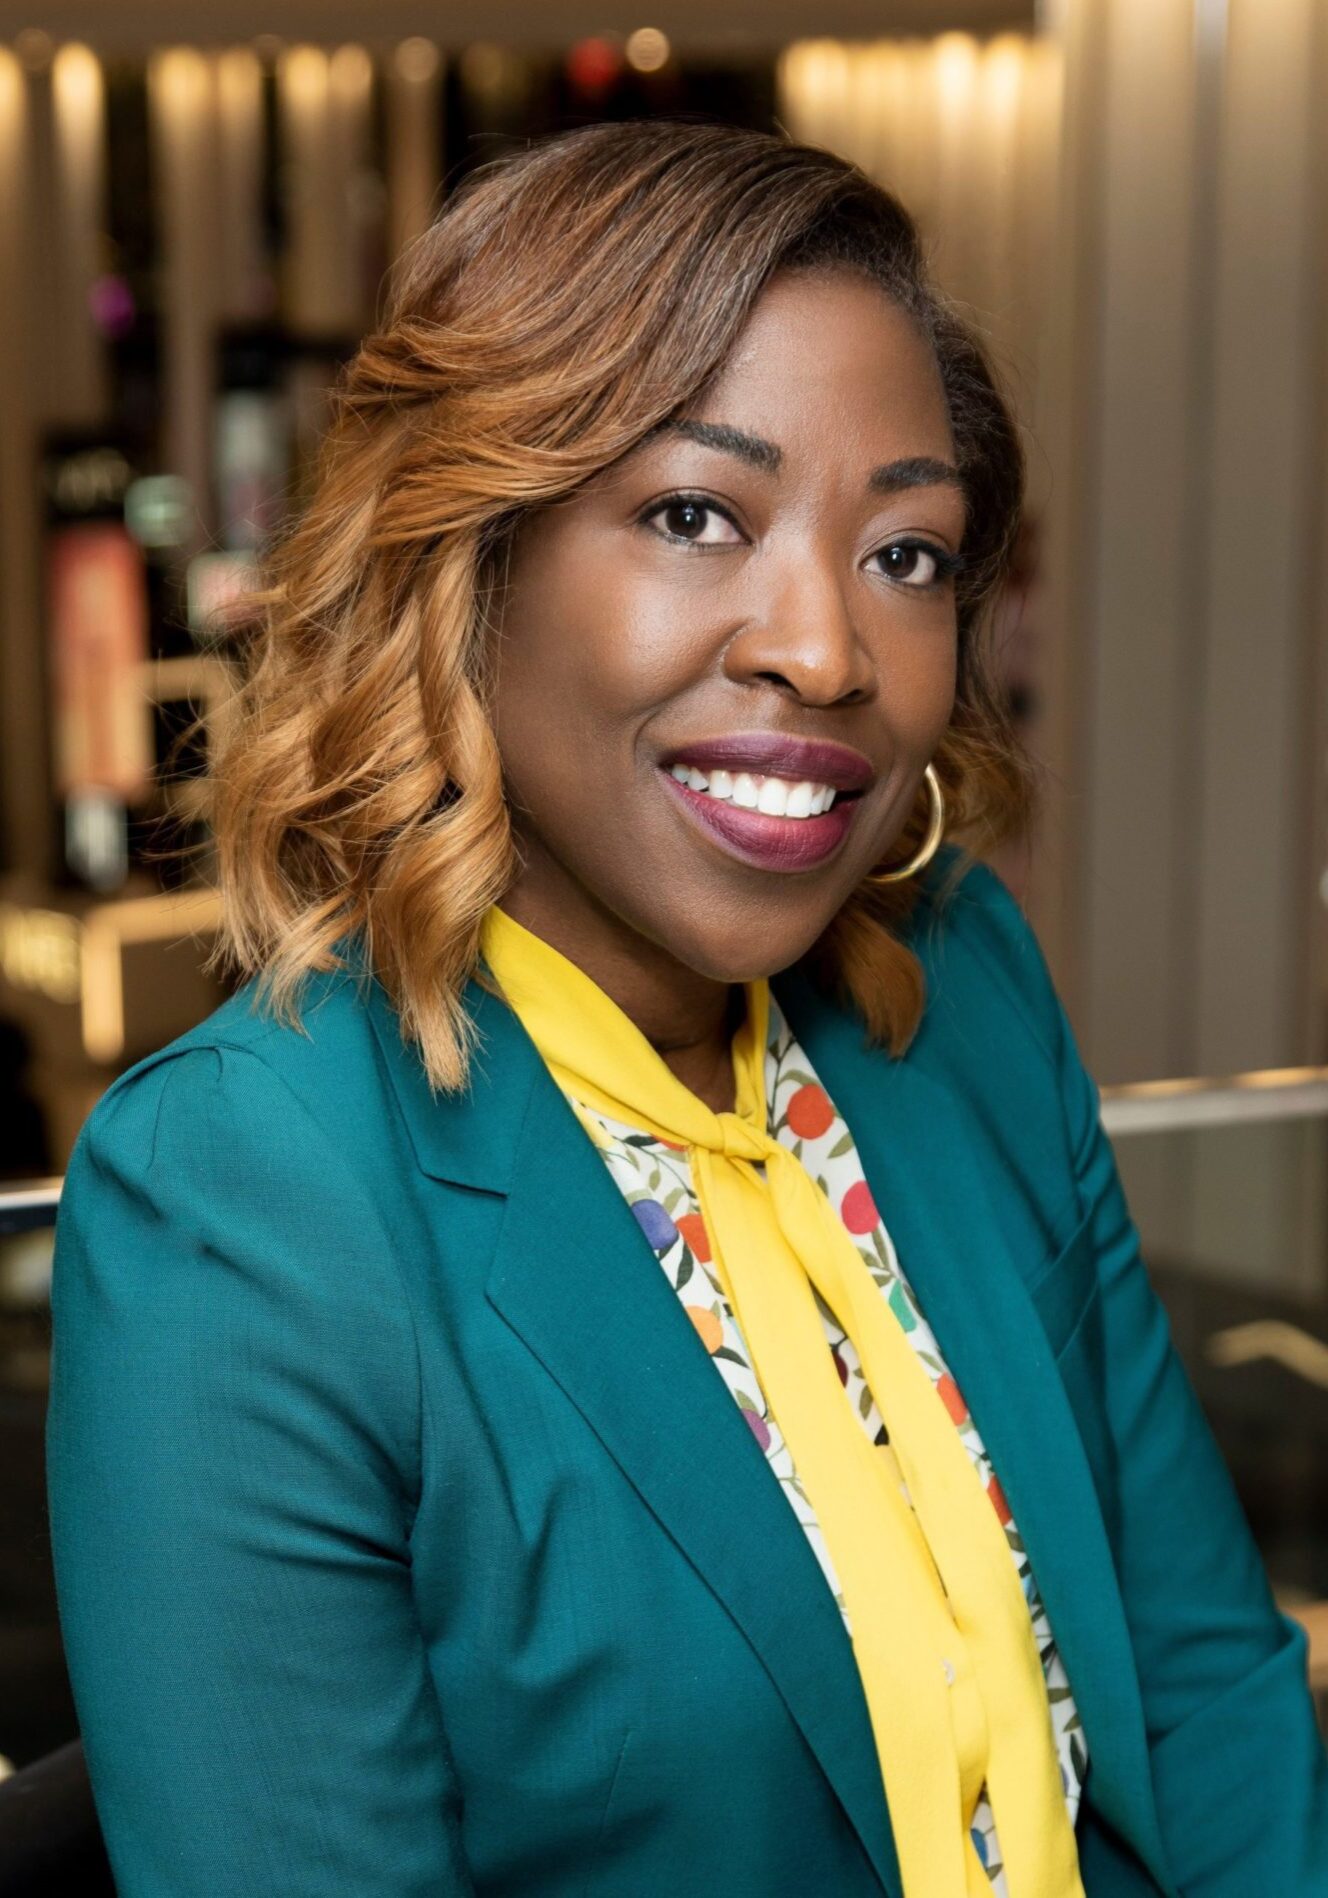 Chief Diversity Officer Shawn Outler Macy's